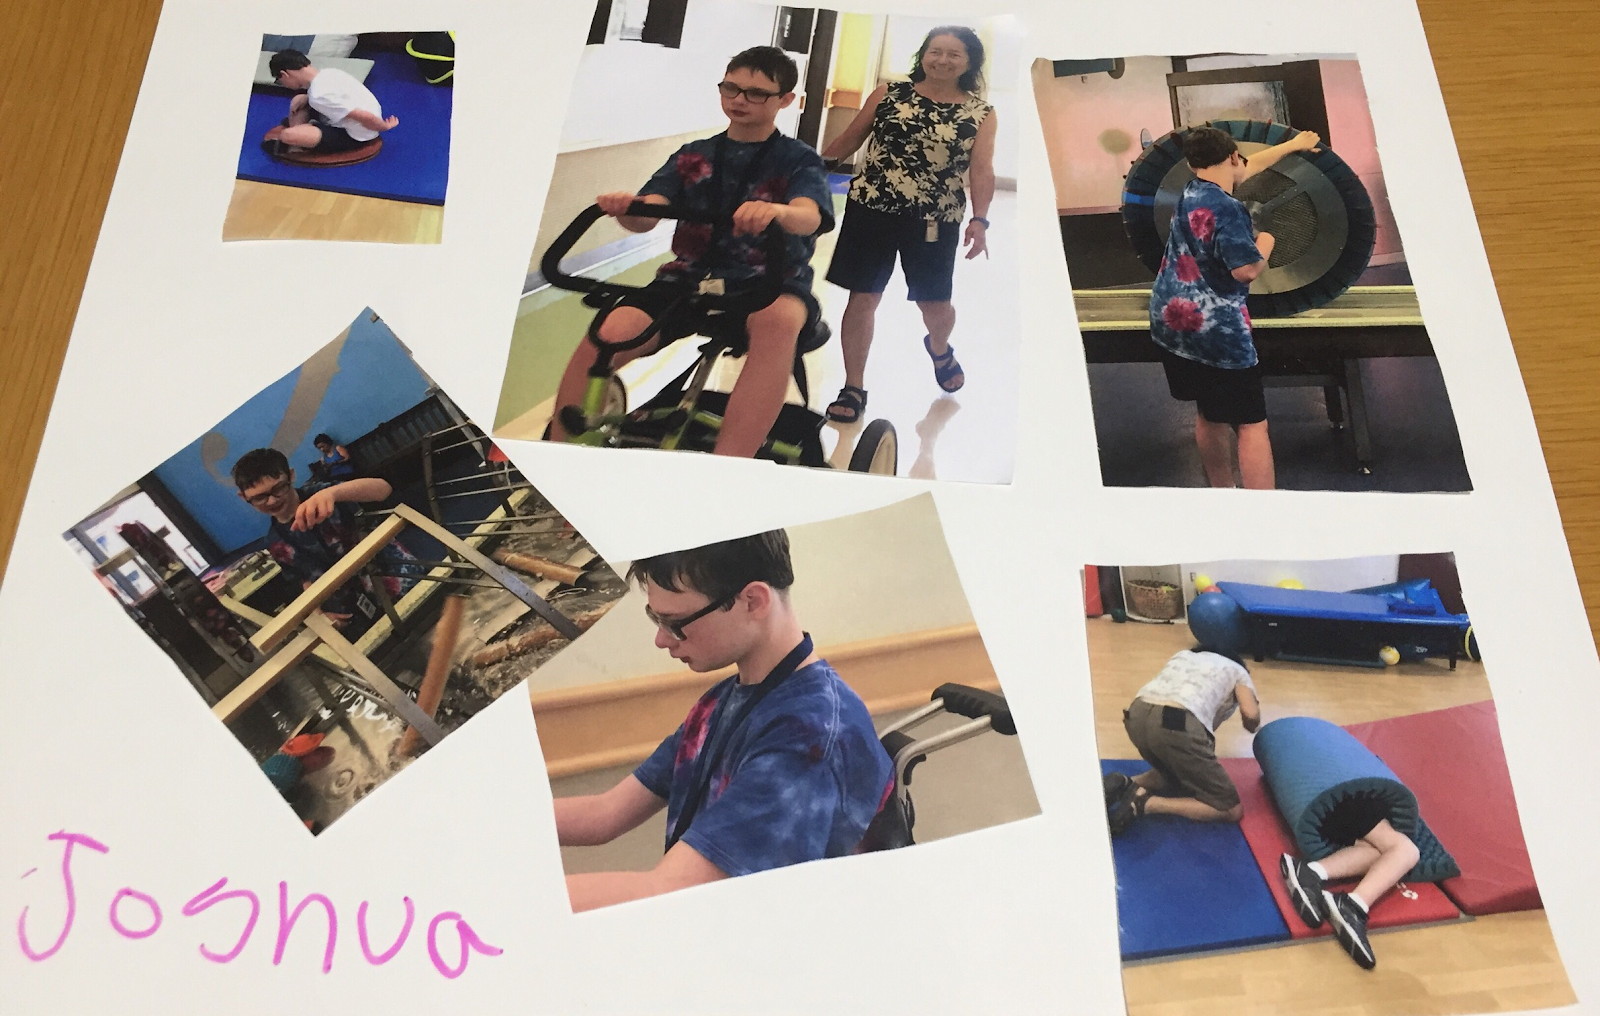 This is a photo collage of Joshua on a white posterboard. There are photographs of him doing different activities at school